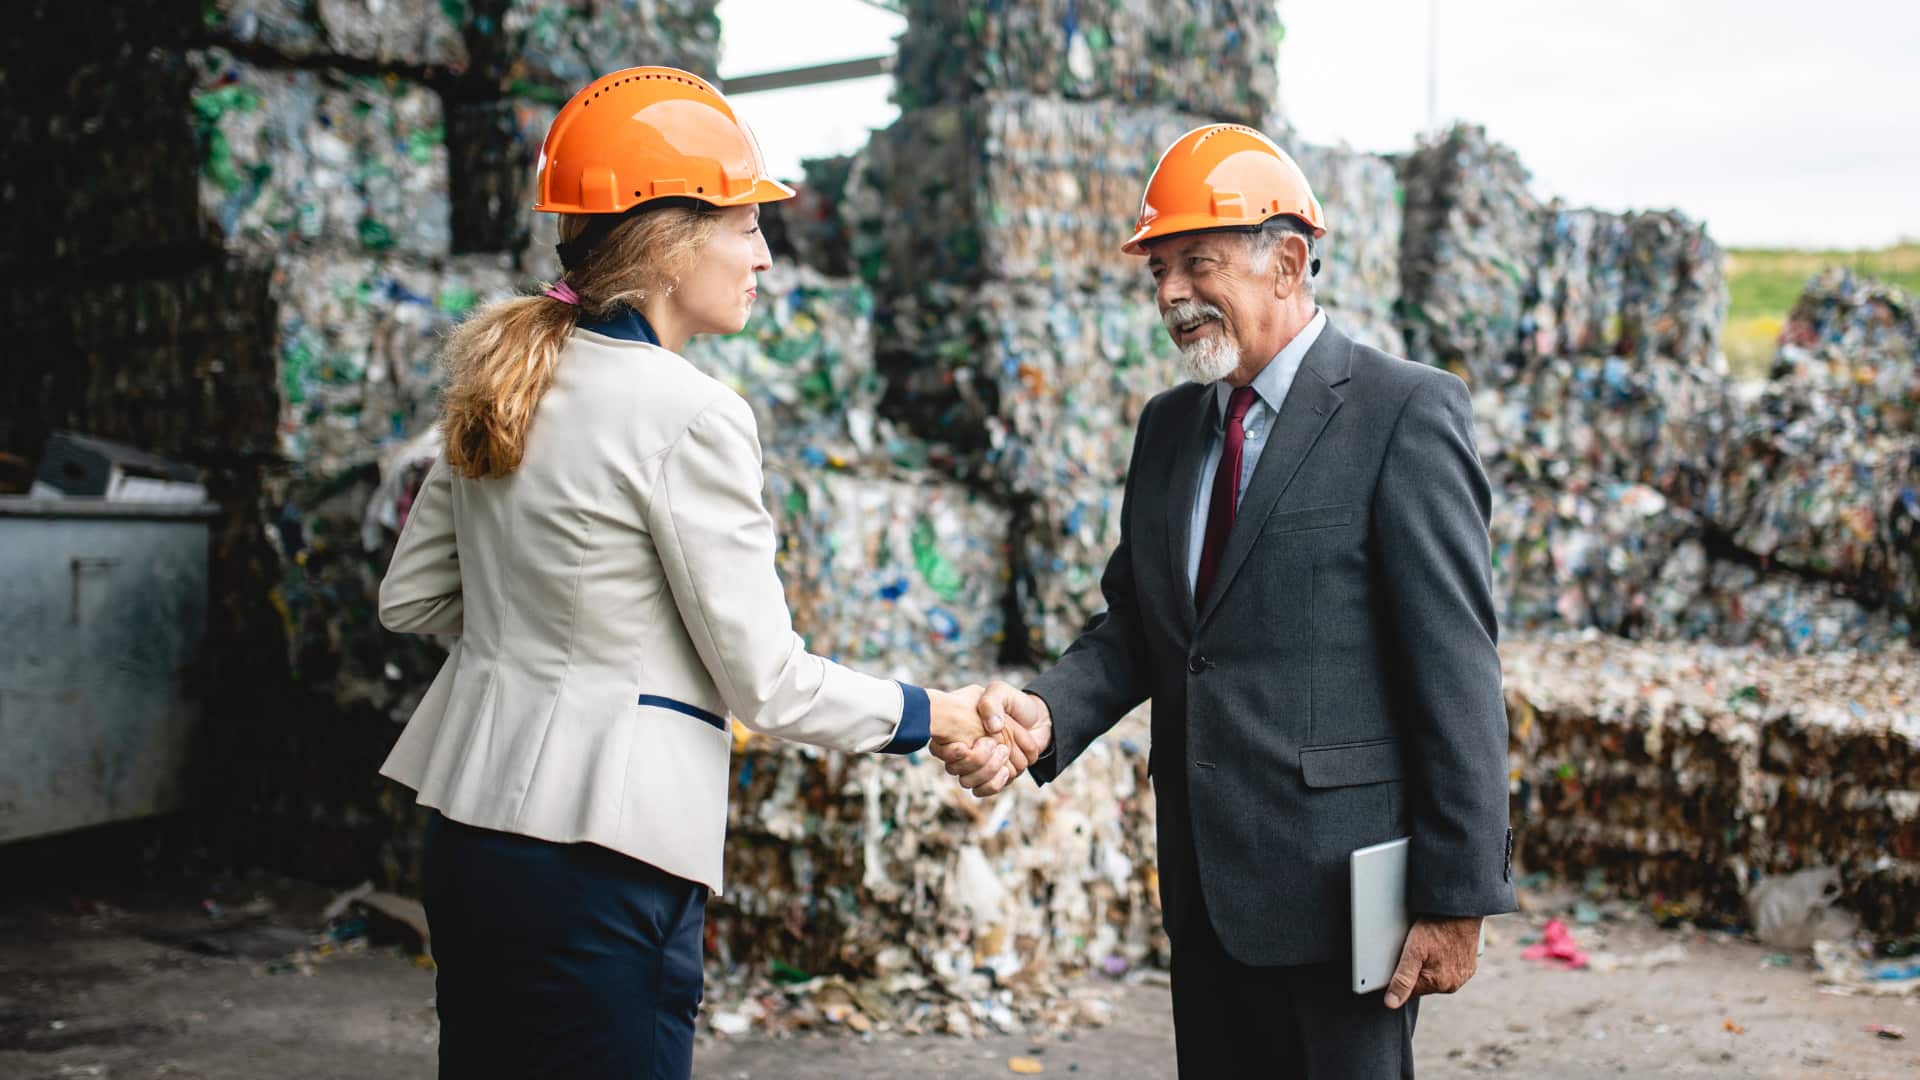 recycling bundles with two people shaking hands